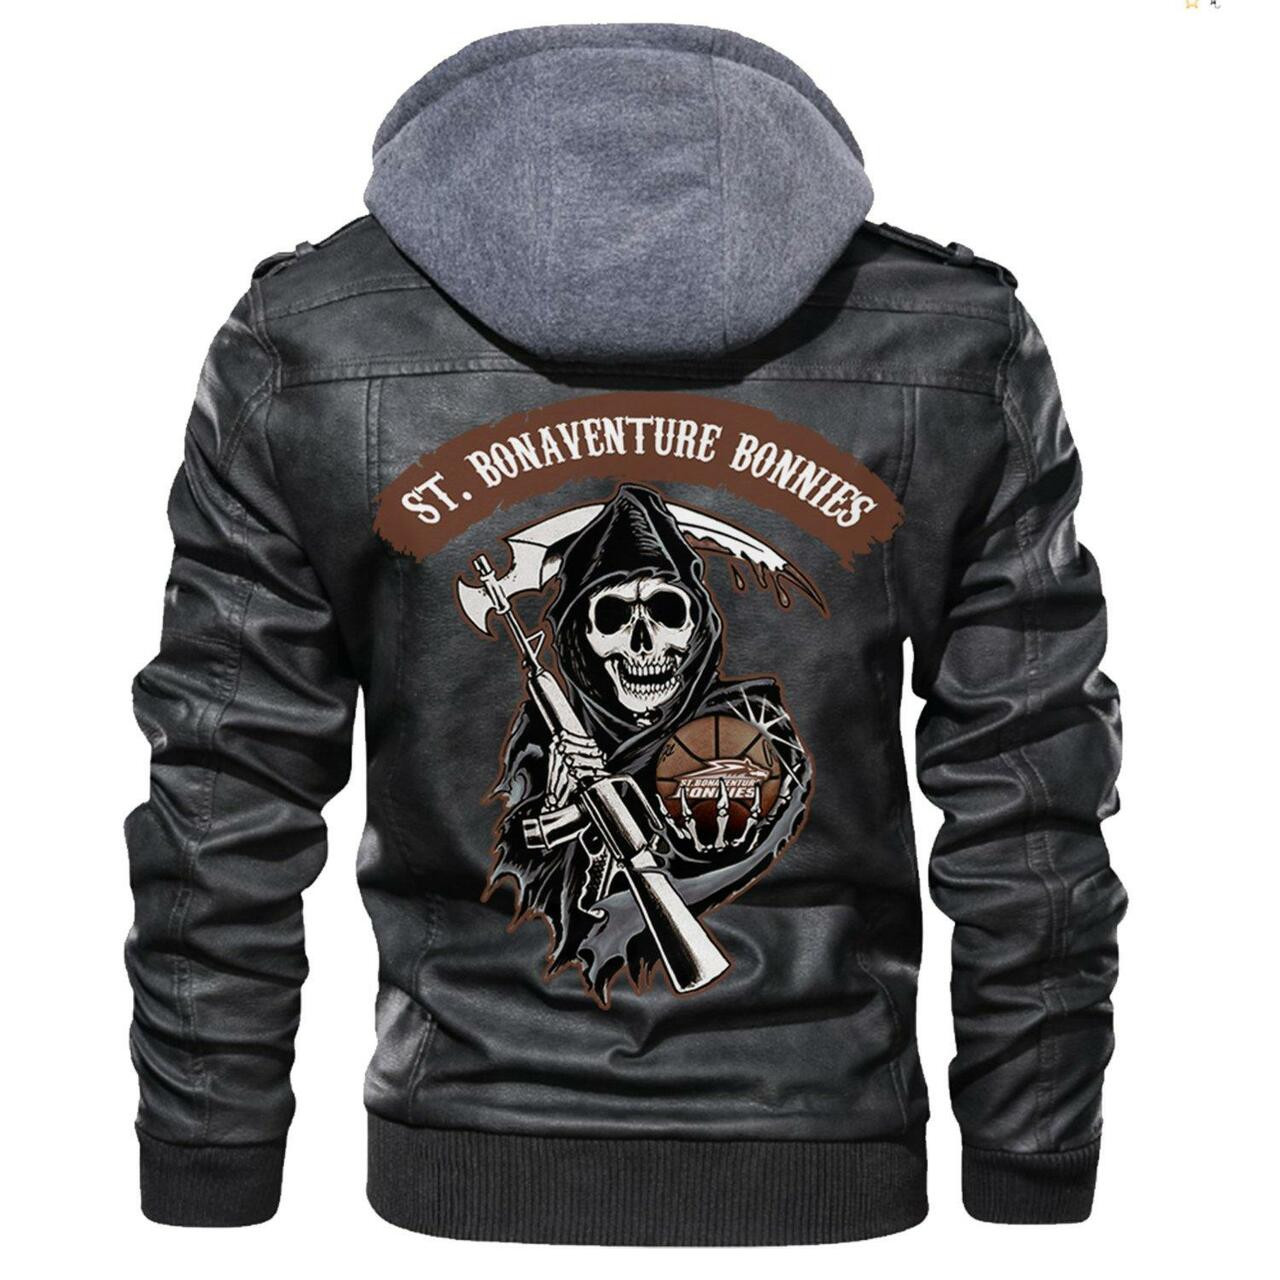 Don't wait another minute, Get Hot Leather Jacket today 71